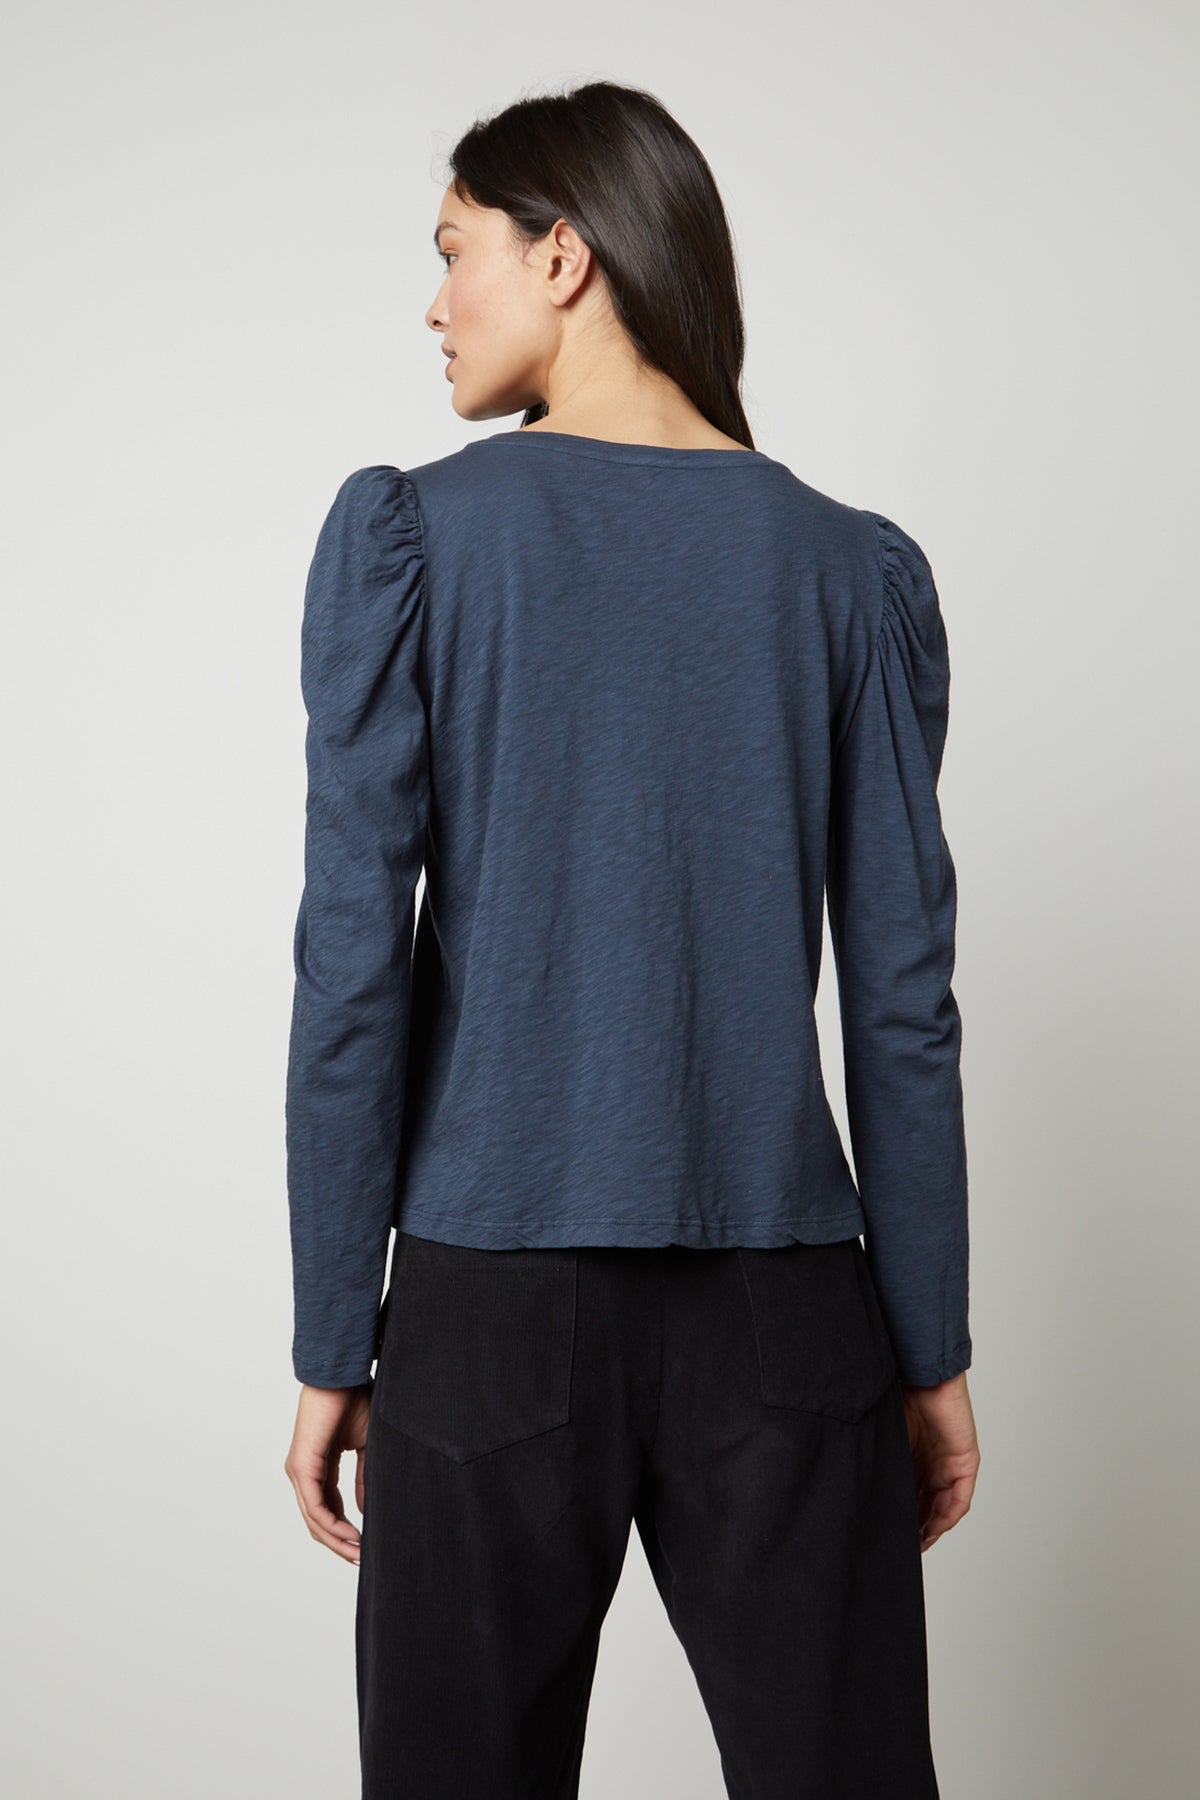 The back view of a woman wearing a Velvet by Graham & Spencer TORA CREW NECK TEE.-26872376819905